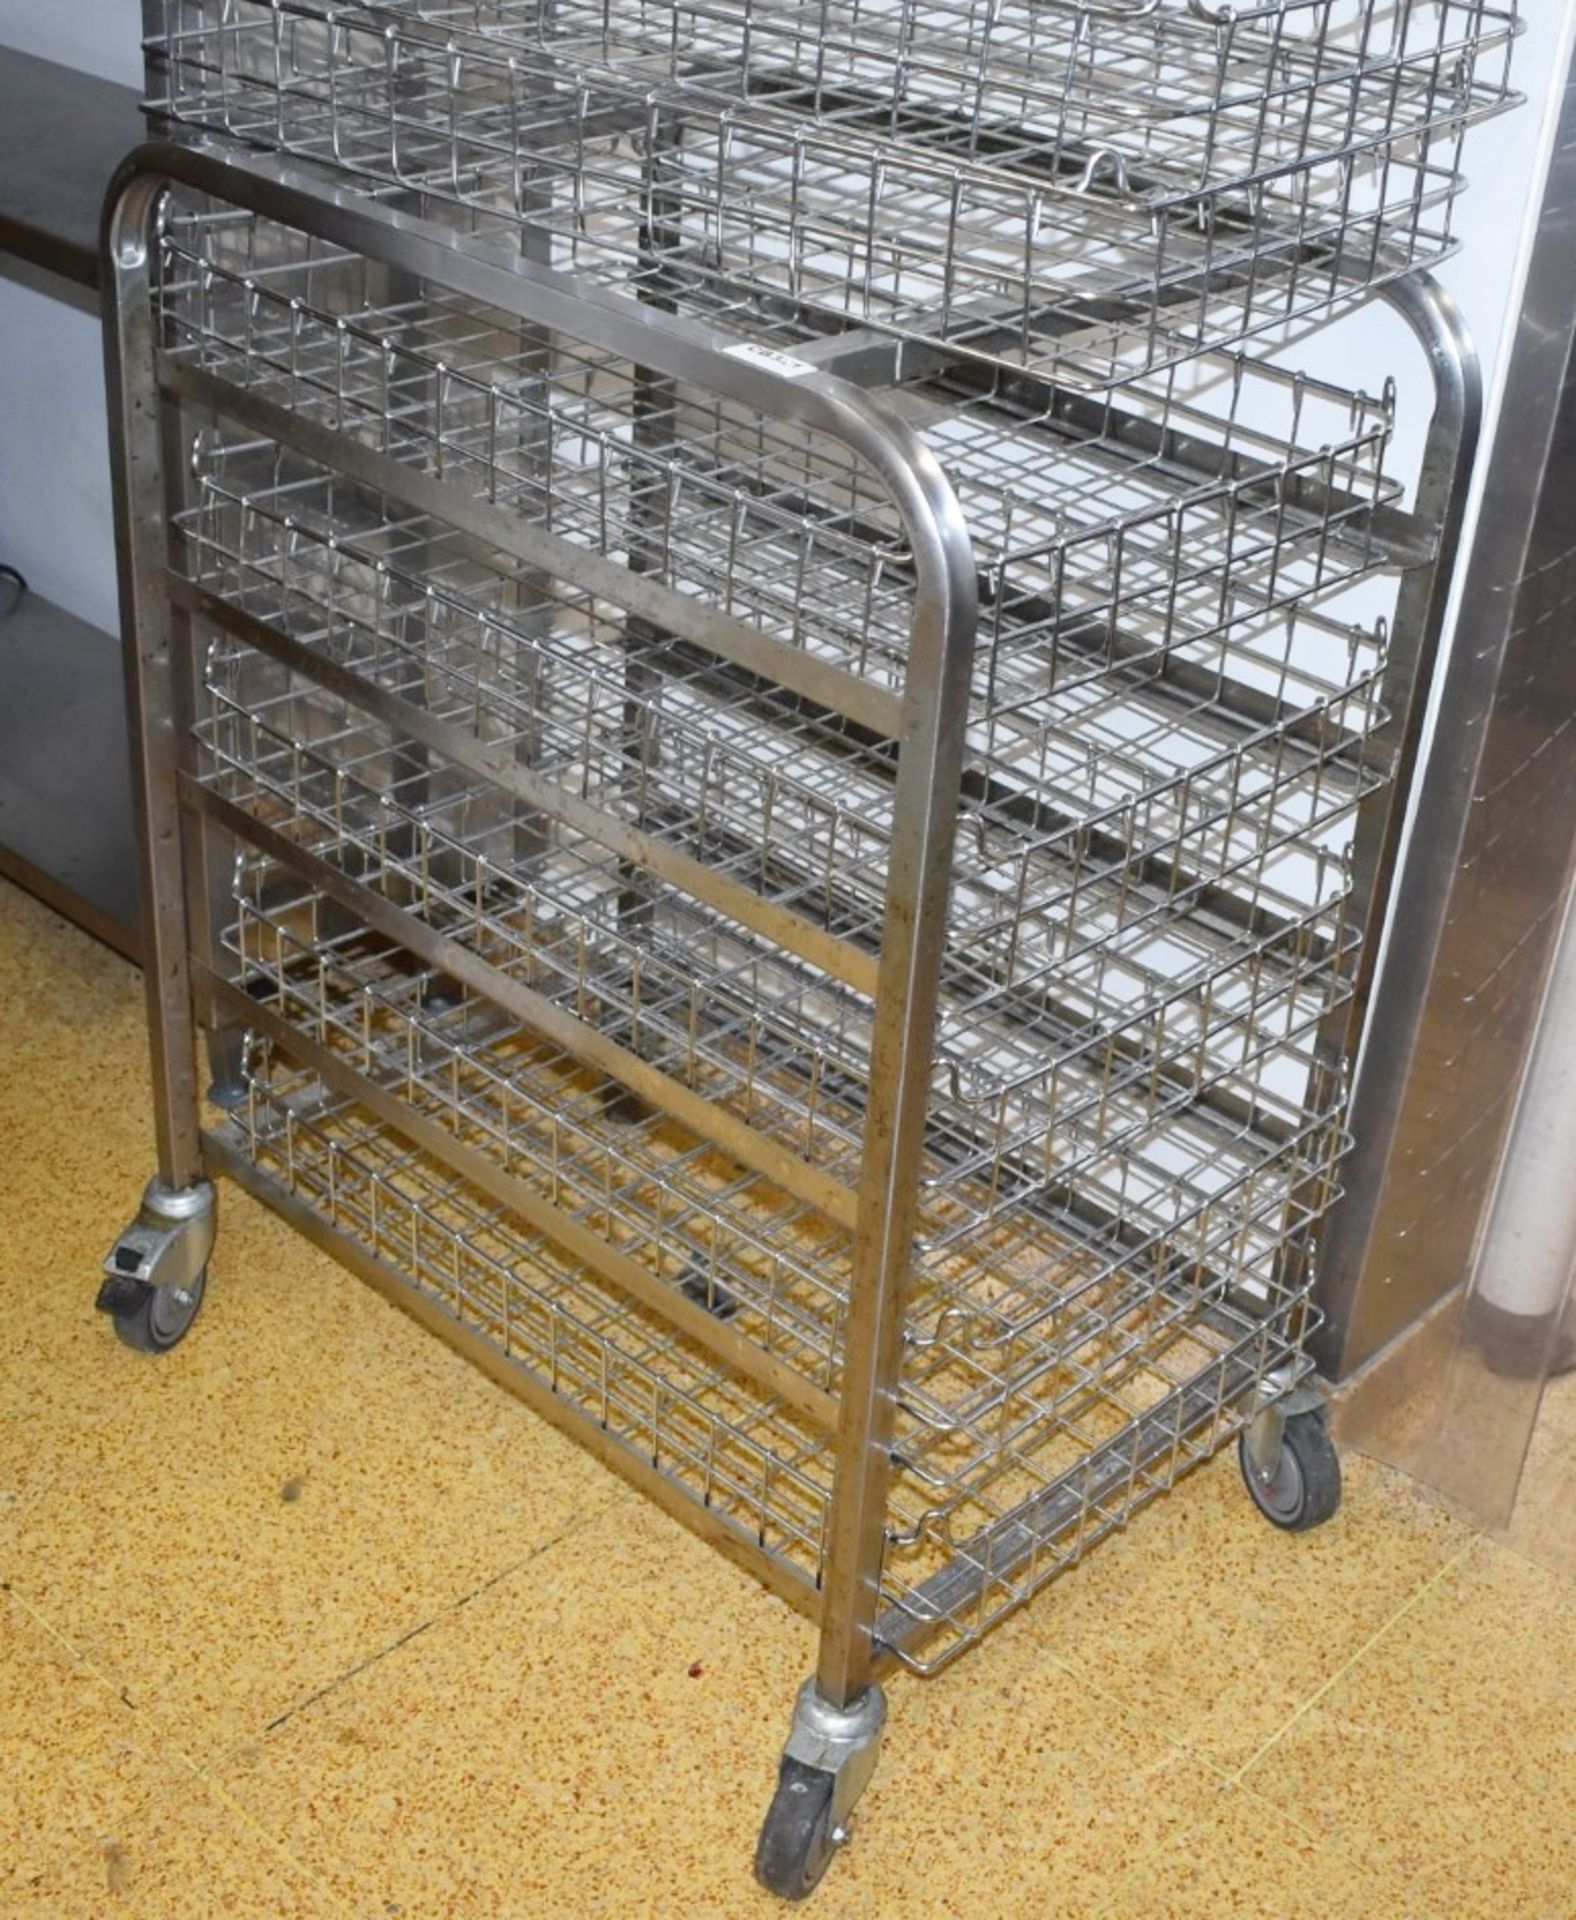 1 x Stainless Steel Basket Trolley With Lockable Castor Wheels and Five Chrome Wire Baskets - H100 x - Image 2 of 2